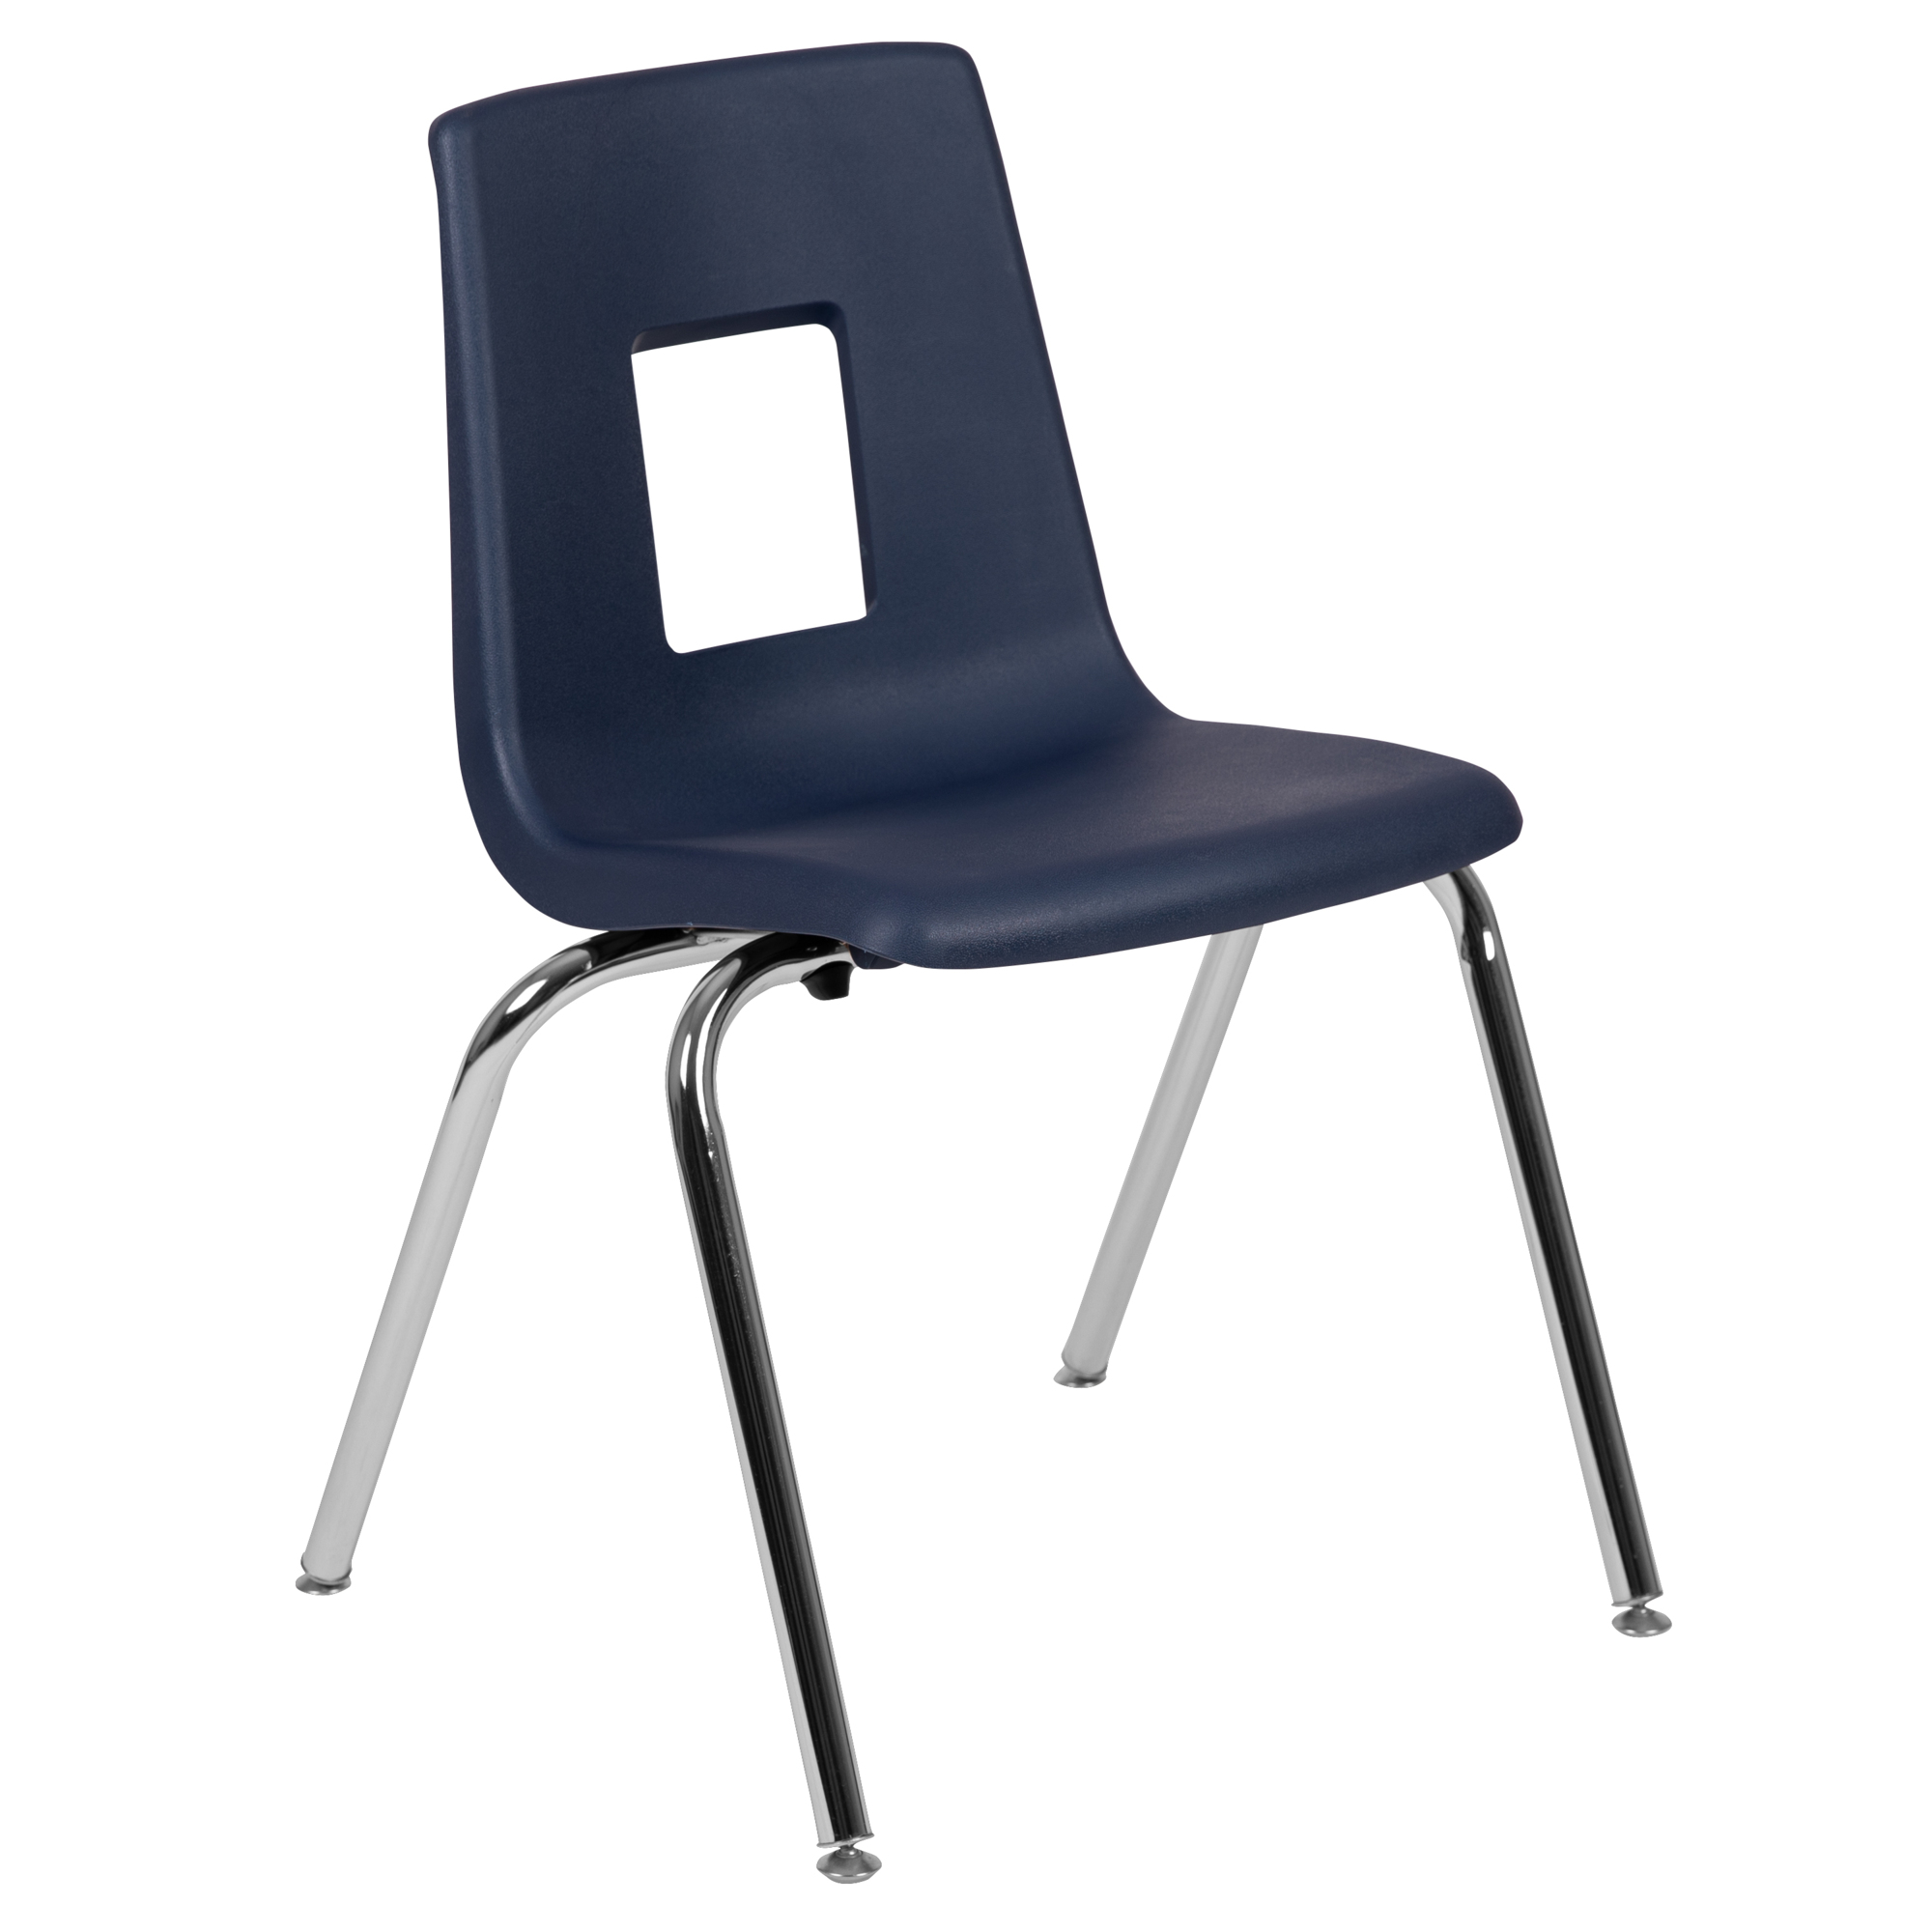 Flash Furniture, Navy Student Stack Chair 18Inch - Classroom Chair, Primary Color Blue, Included (qty.) 1, Model ADVSSC18NAVY